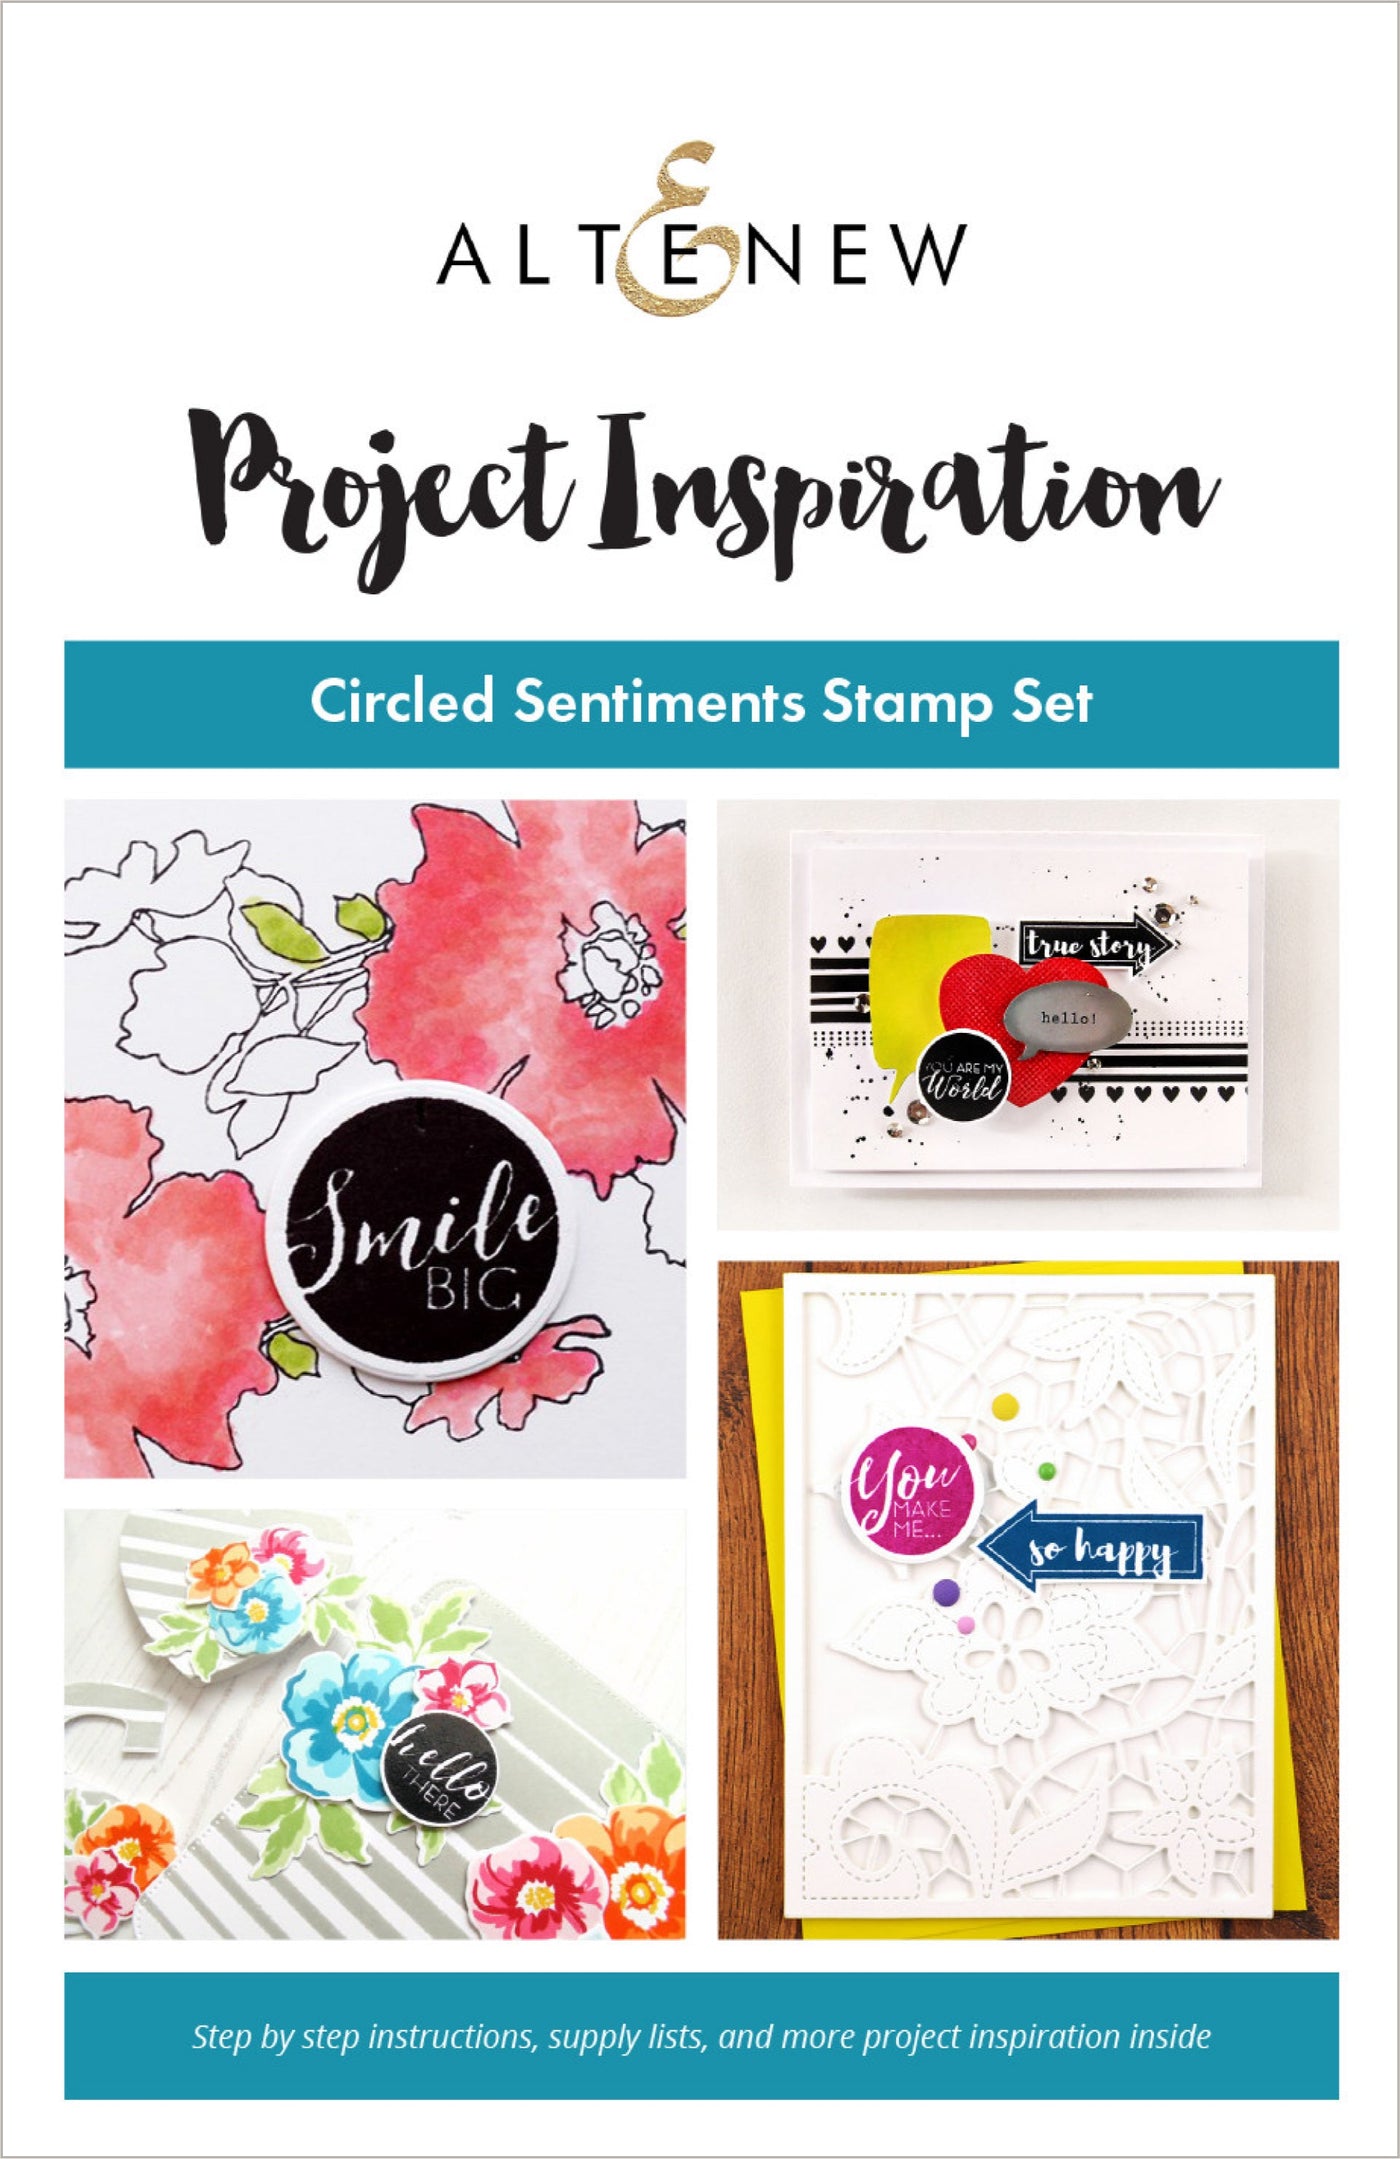 Printed Media Circled Sentiments Inspiration Guide